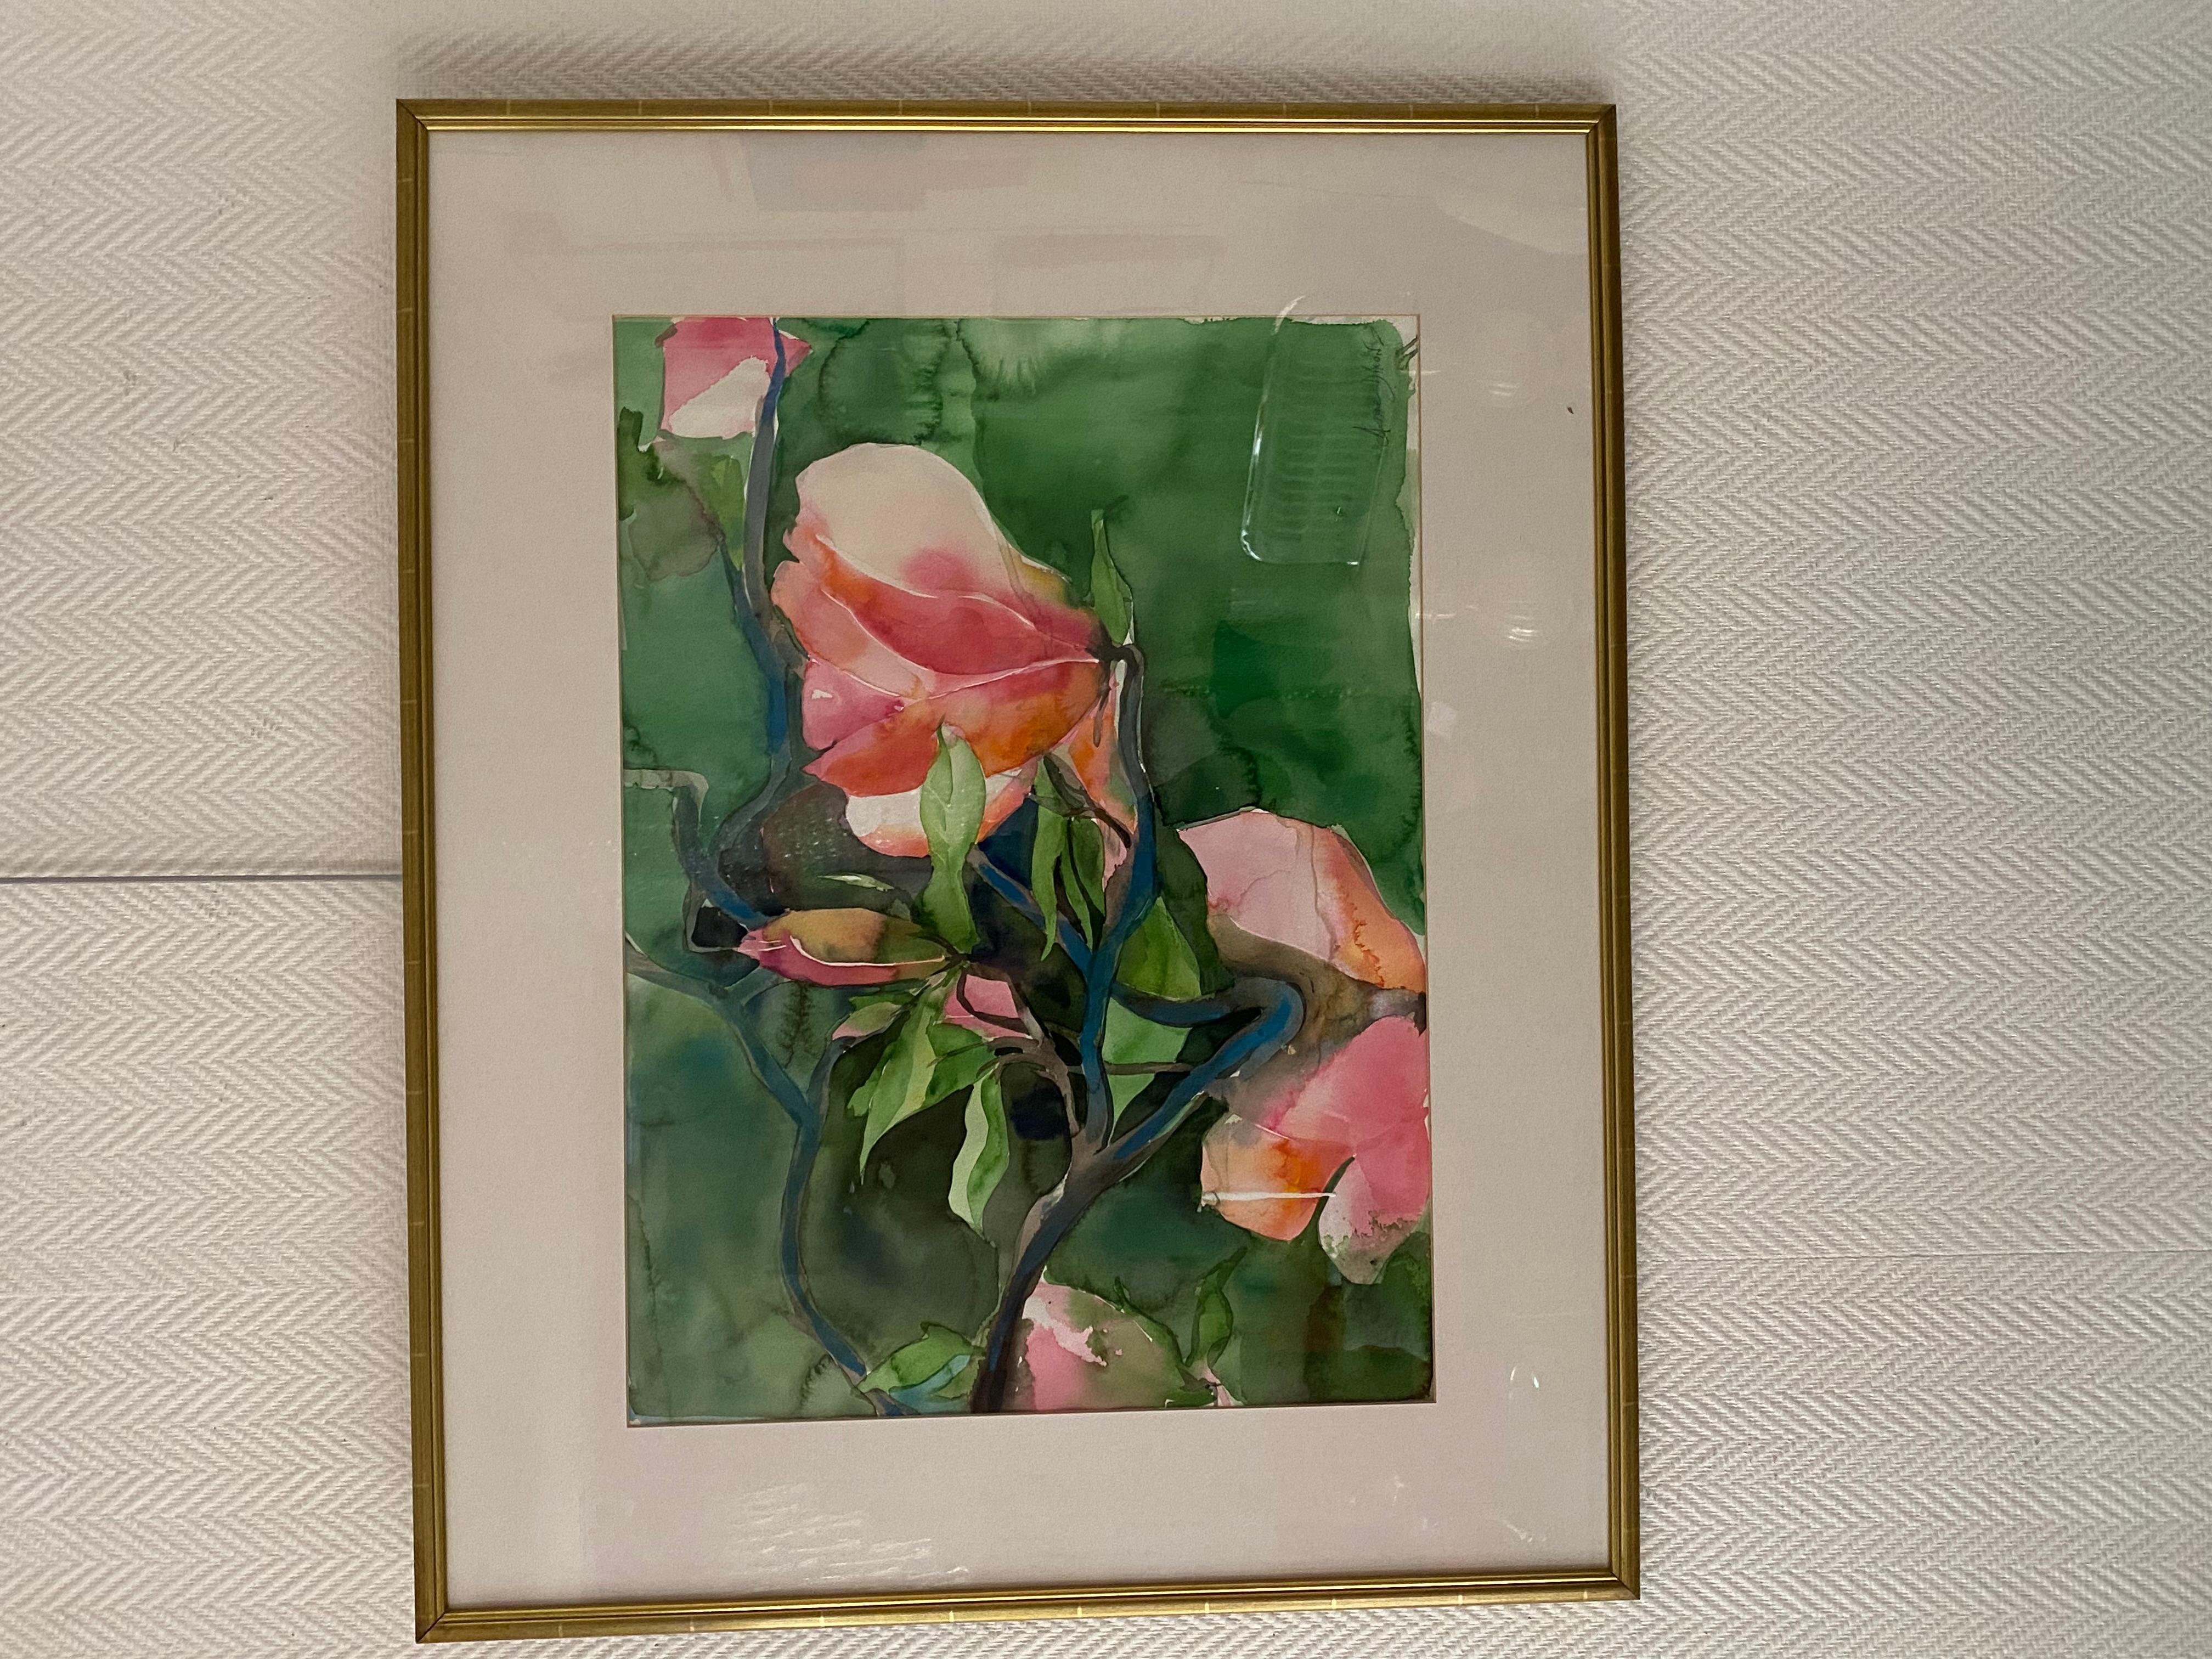 Anne Dixon 
Exotic flowers 
Watercolour on paper 
Signed lower right 
Circa 1990
Frame size : 102 x 83 x 2 cms 
Dimensions of work : 75 x 55 cms 
950 euros 